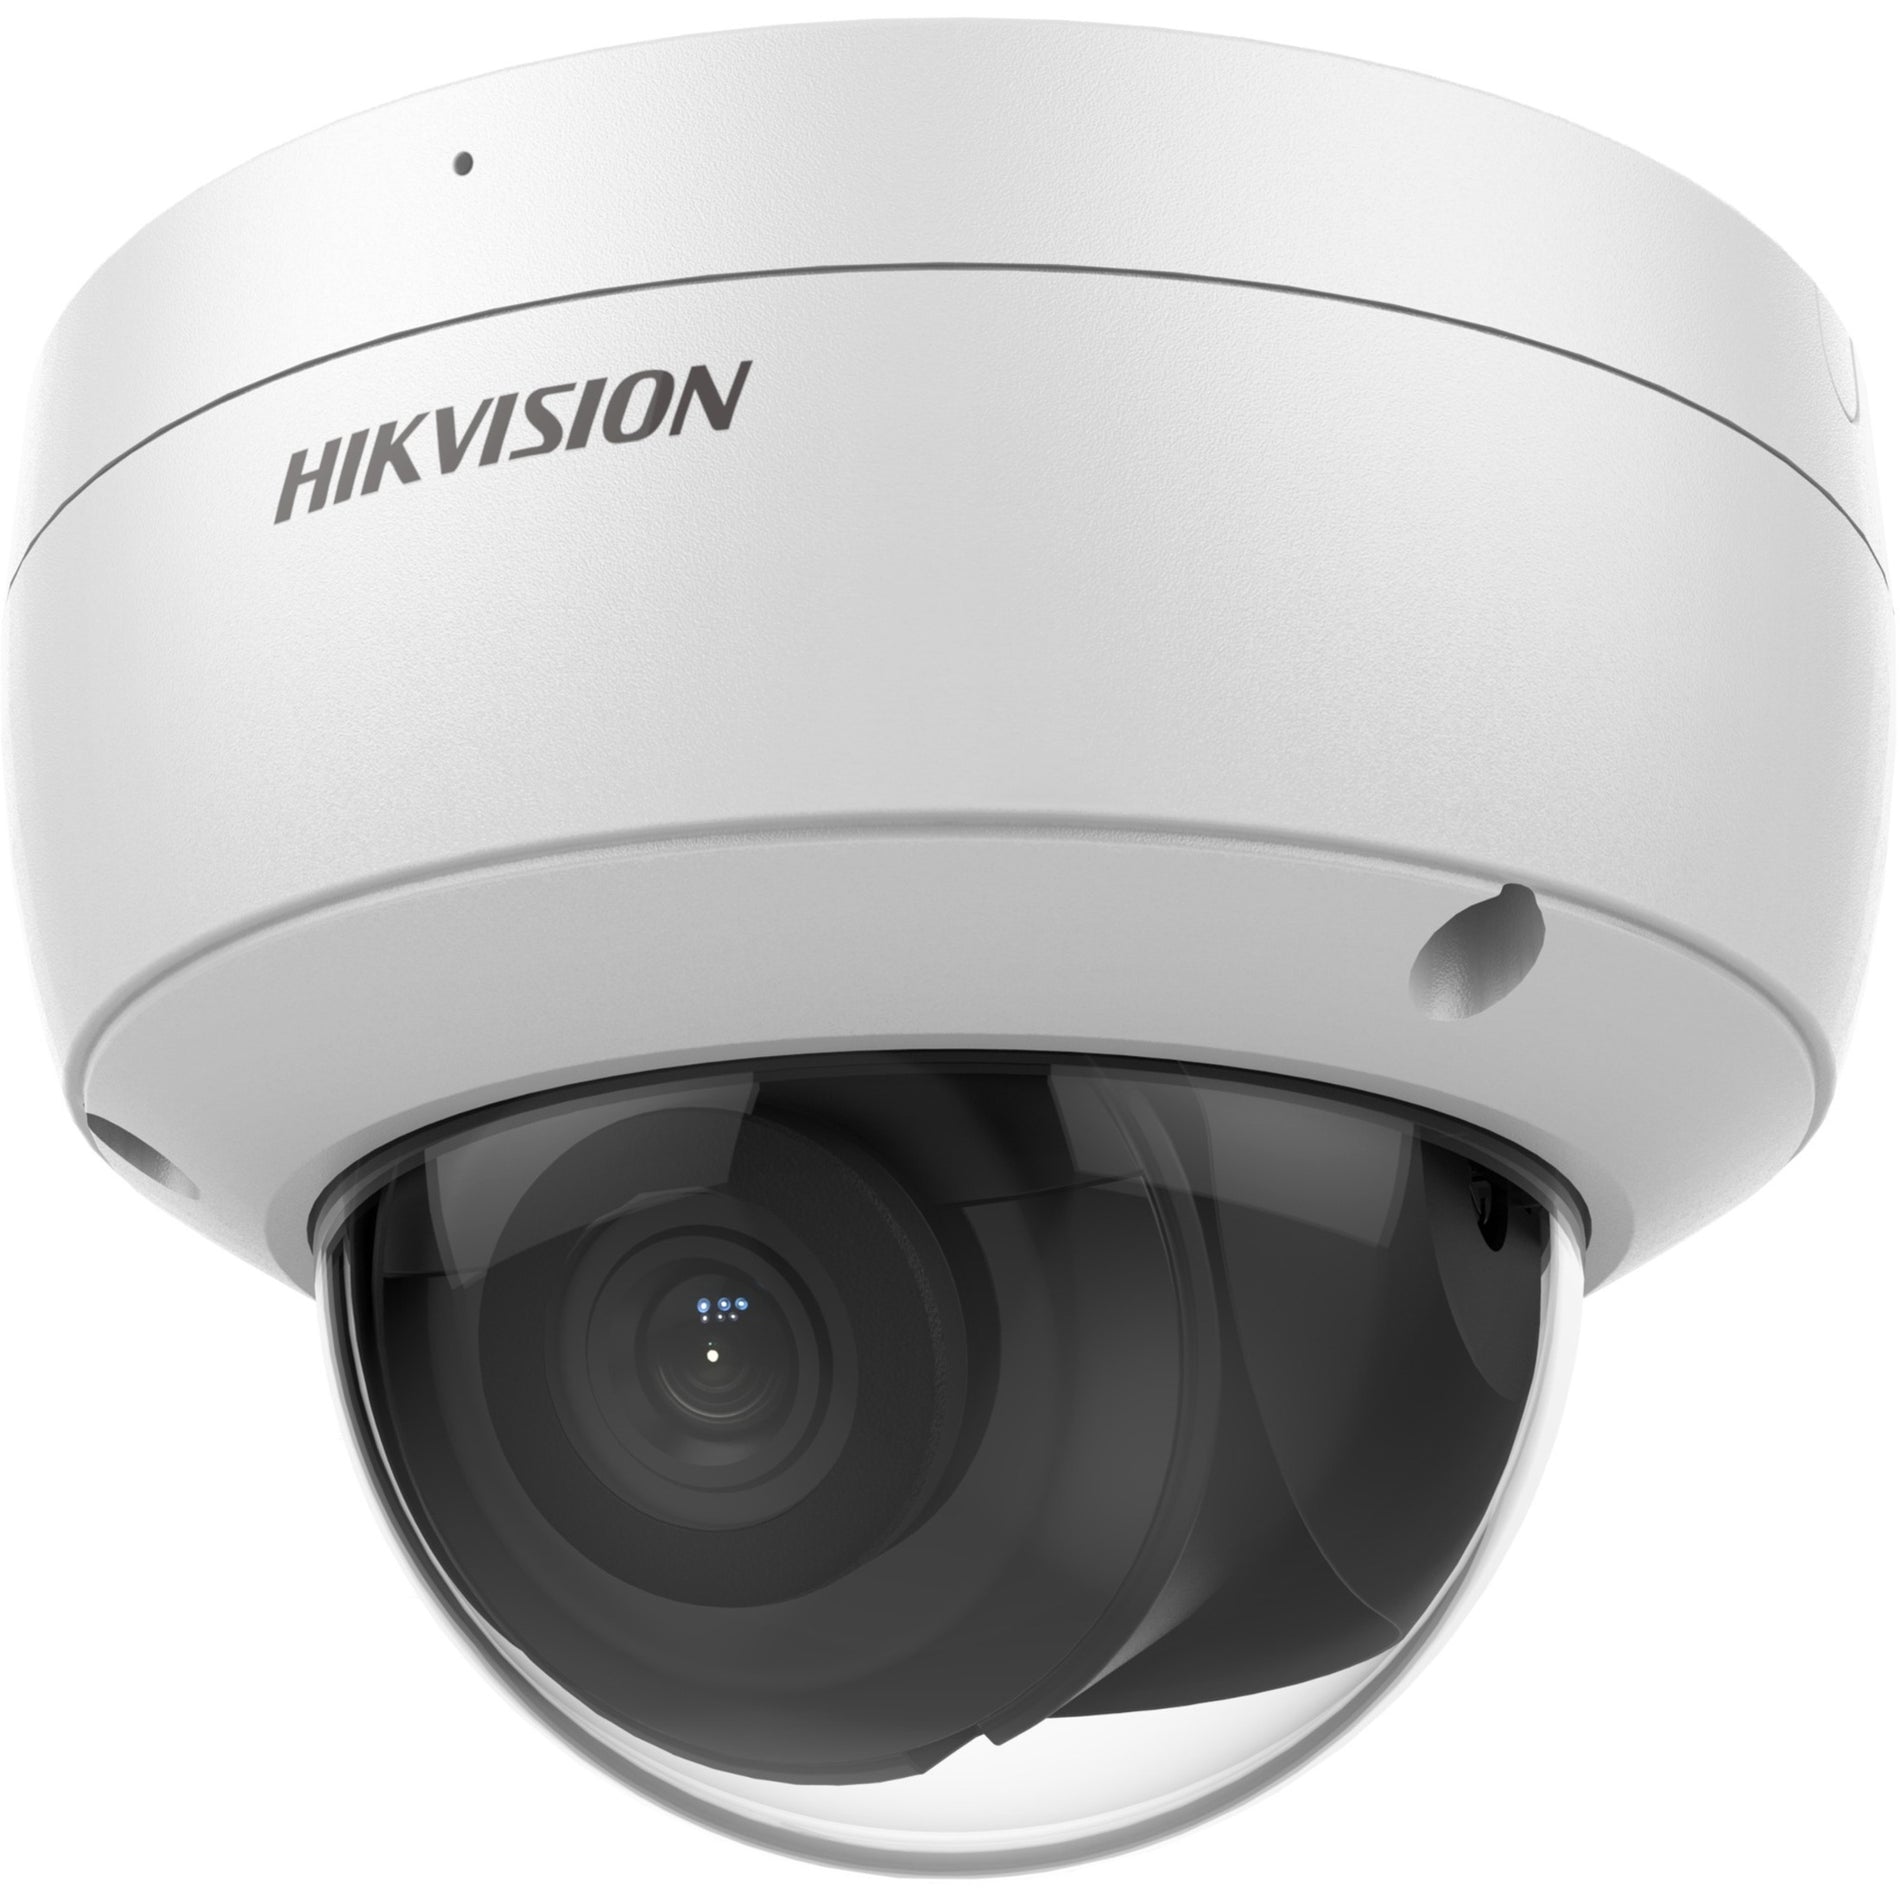 Hikvision DS-2CD2183G2-IU 4MM 8 MP AcuSense Vandal Fixed Dome Network Camera, 4K, Night Vision, Motion Detection, IP67